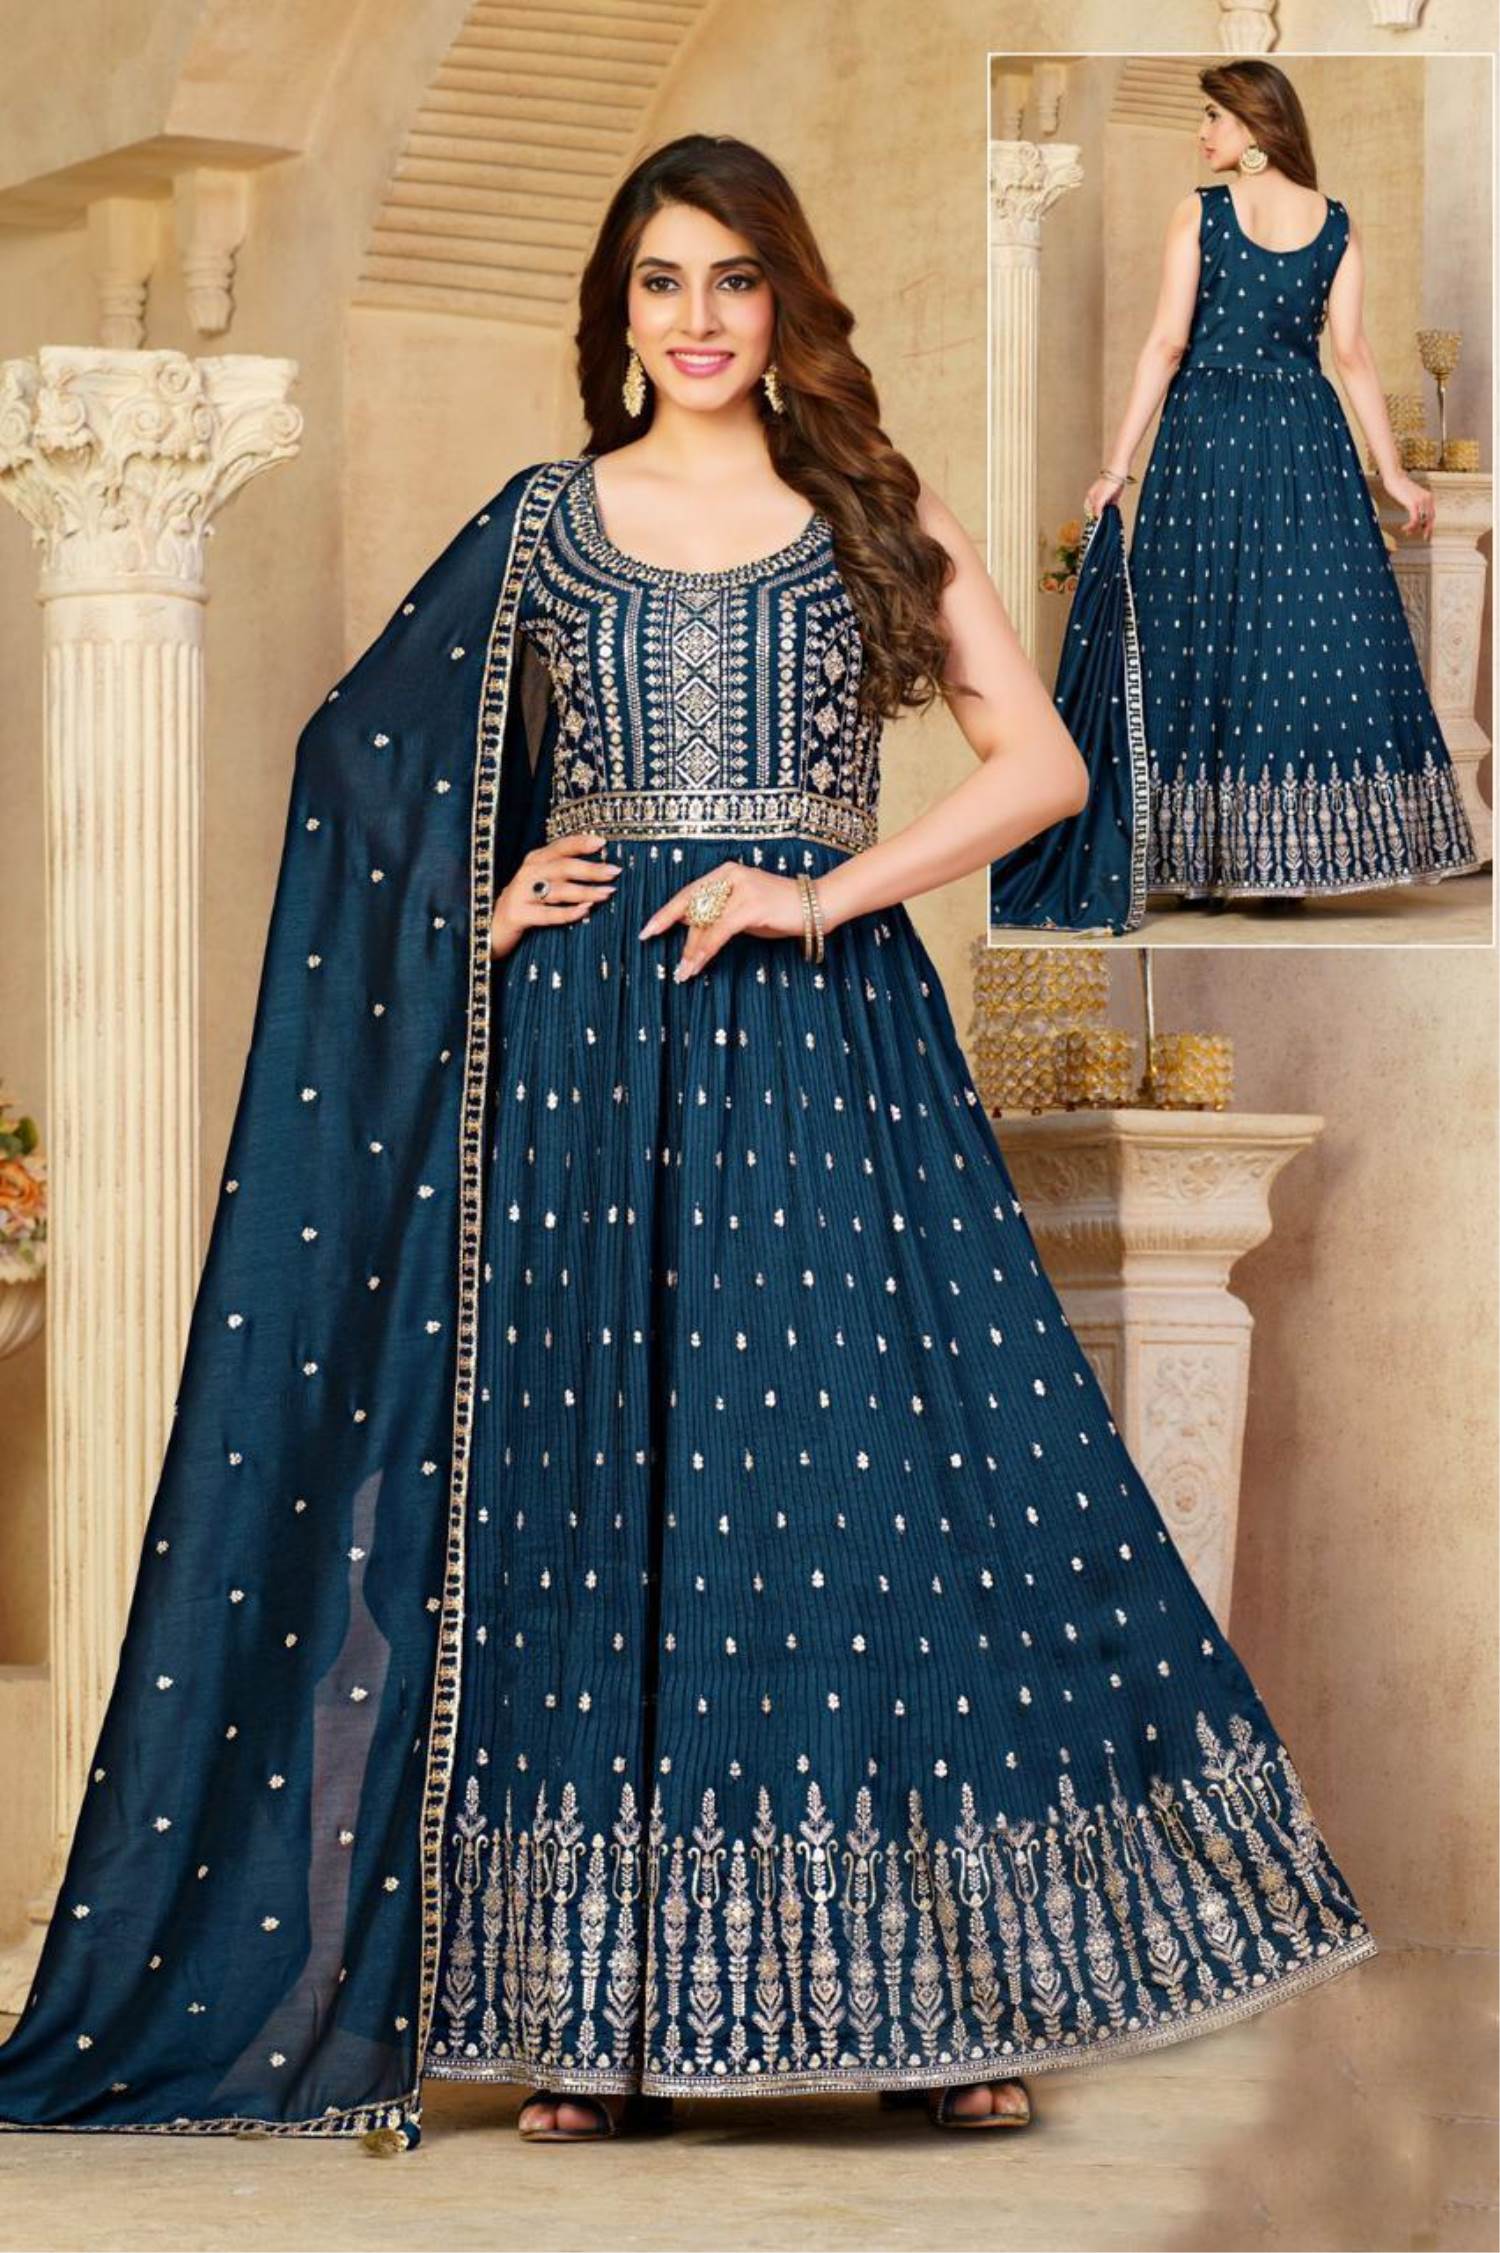 Female Blue Woman Party Wear Dresses, Size: Medium at Rs 2000 in Ghaziabad